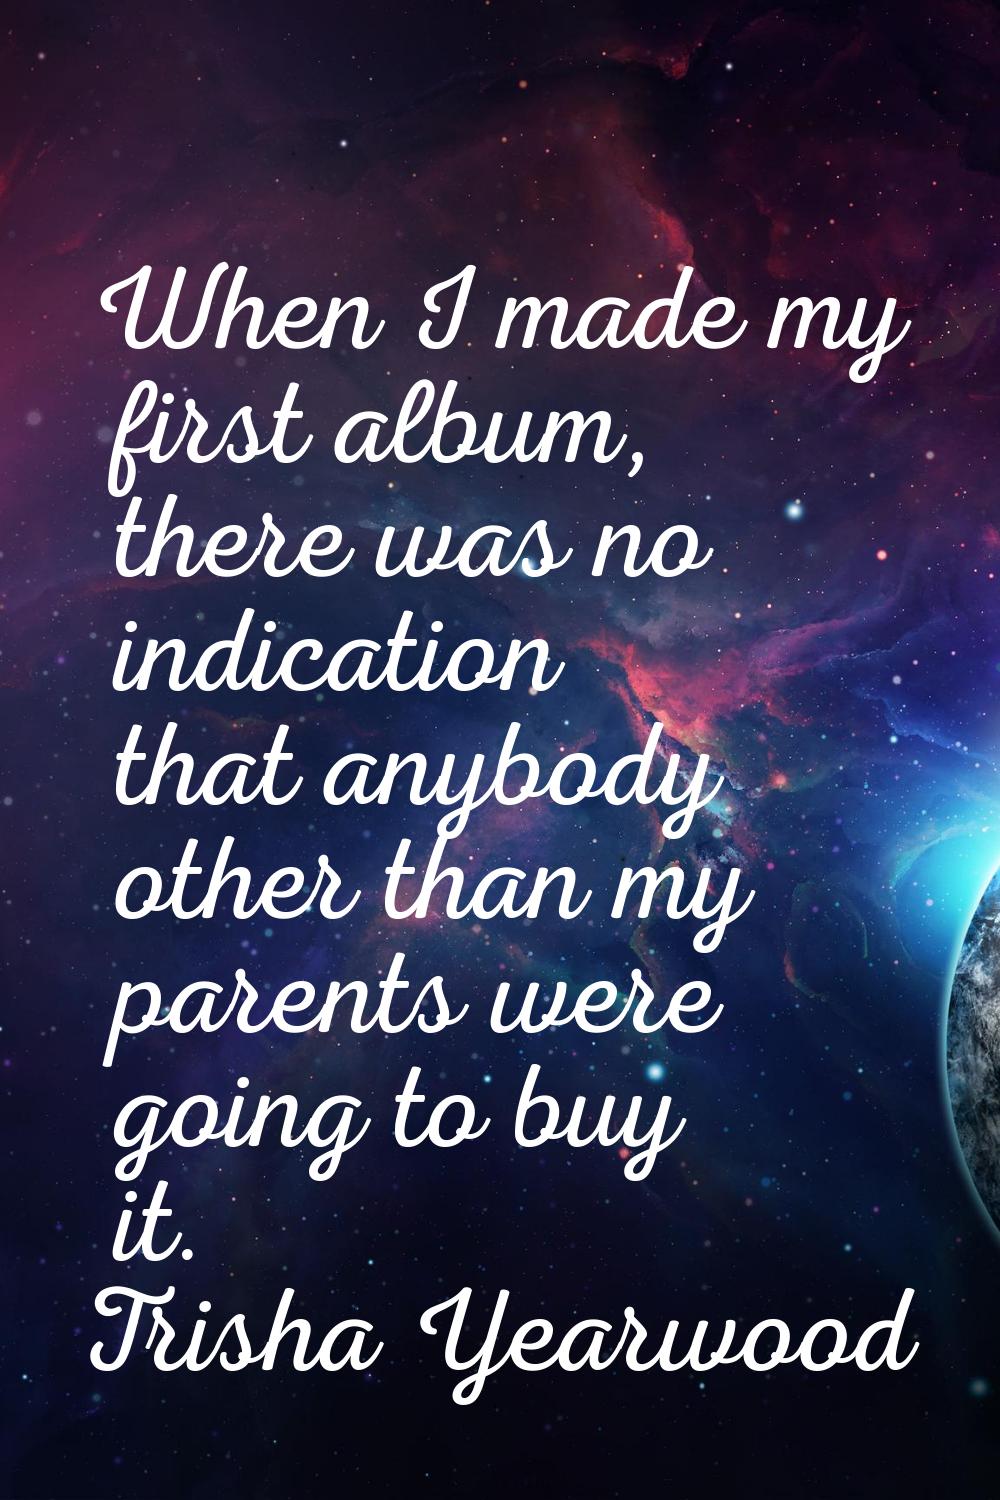 When I made my first album, there was no indication that anybody other than my parents were going t